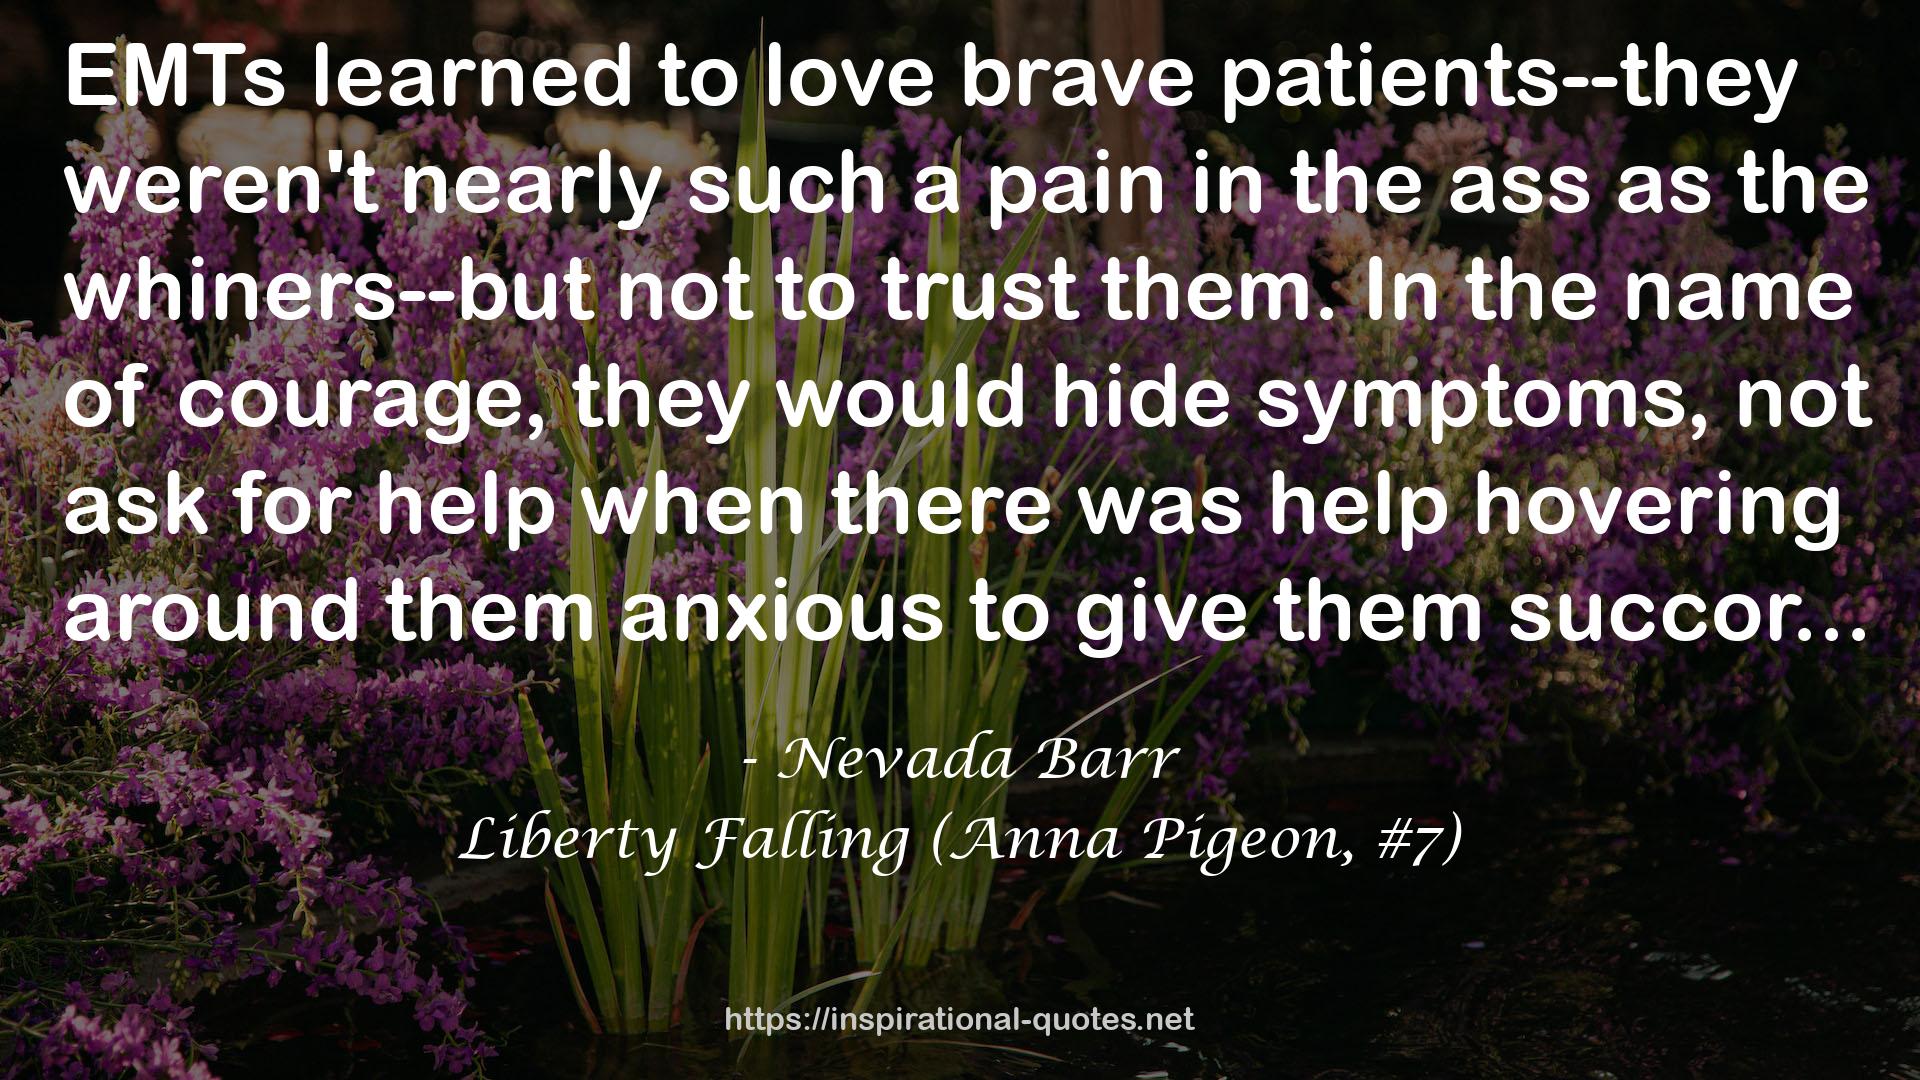 Liberty Falling (Anna Pigeon, #7) QUOTES